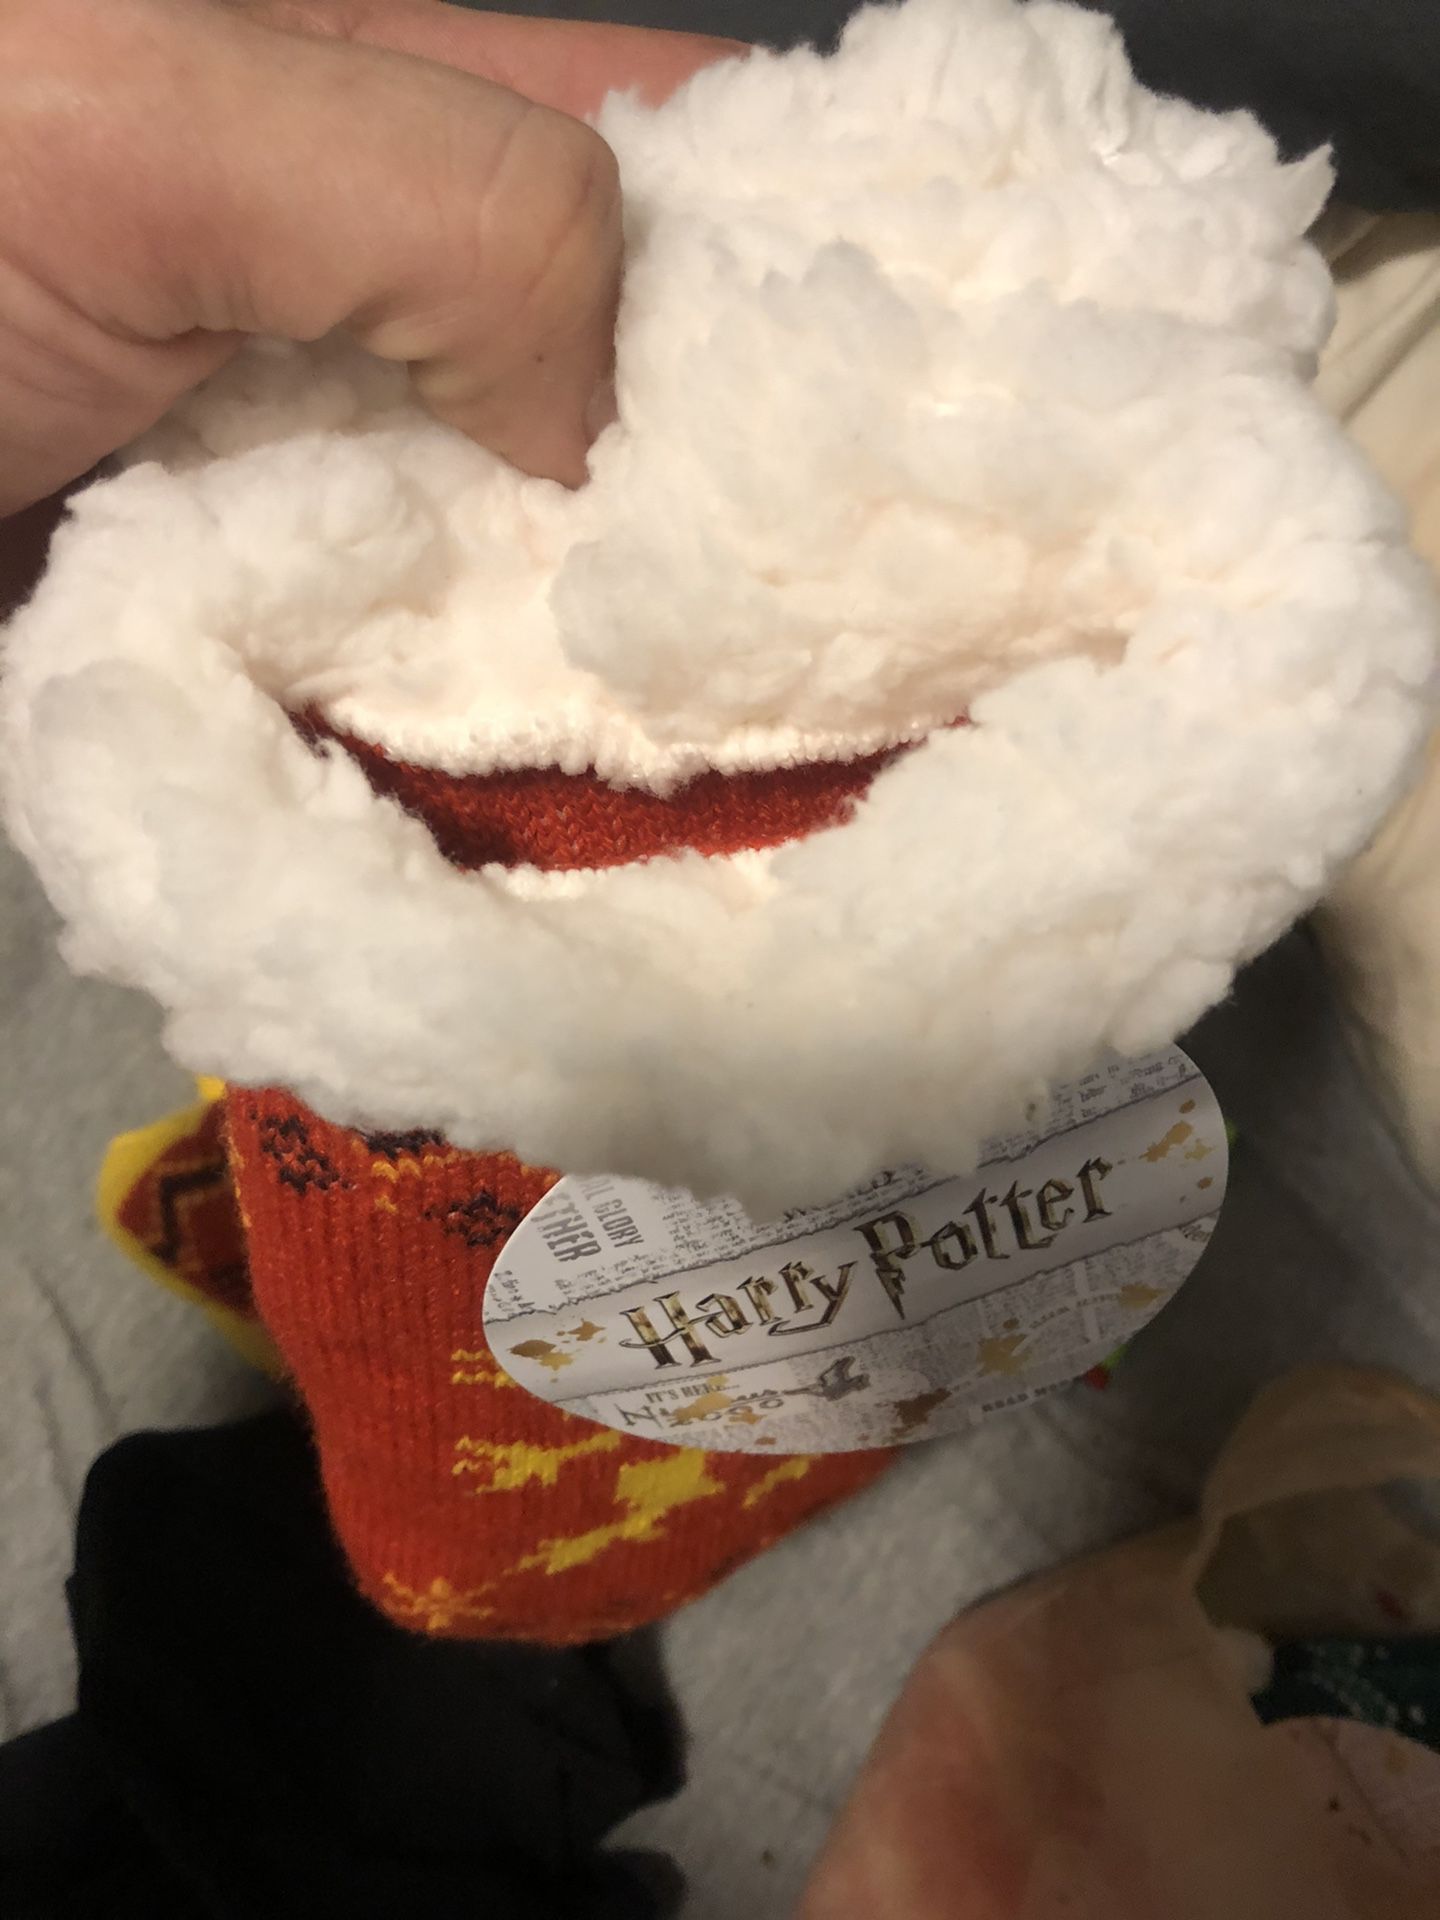 Harry Potter one size fits ok gryffondor house with the logo at the bottom . With the lion in the middle never worn selling for less than half retail